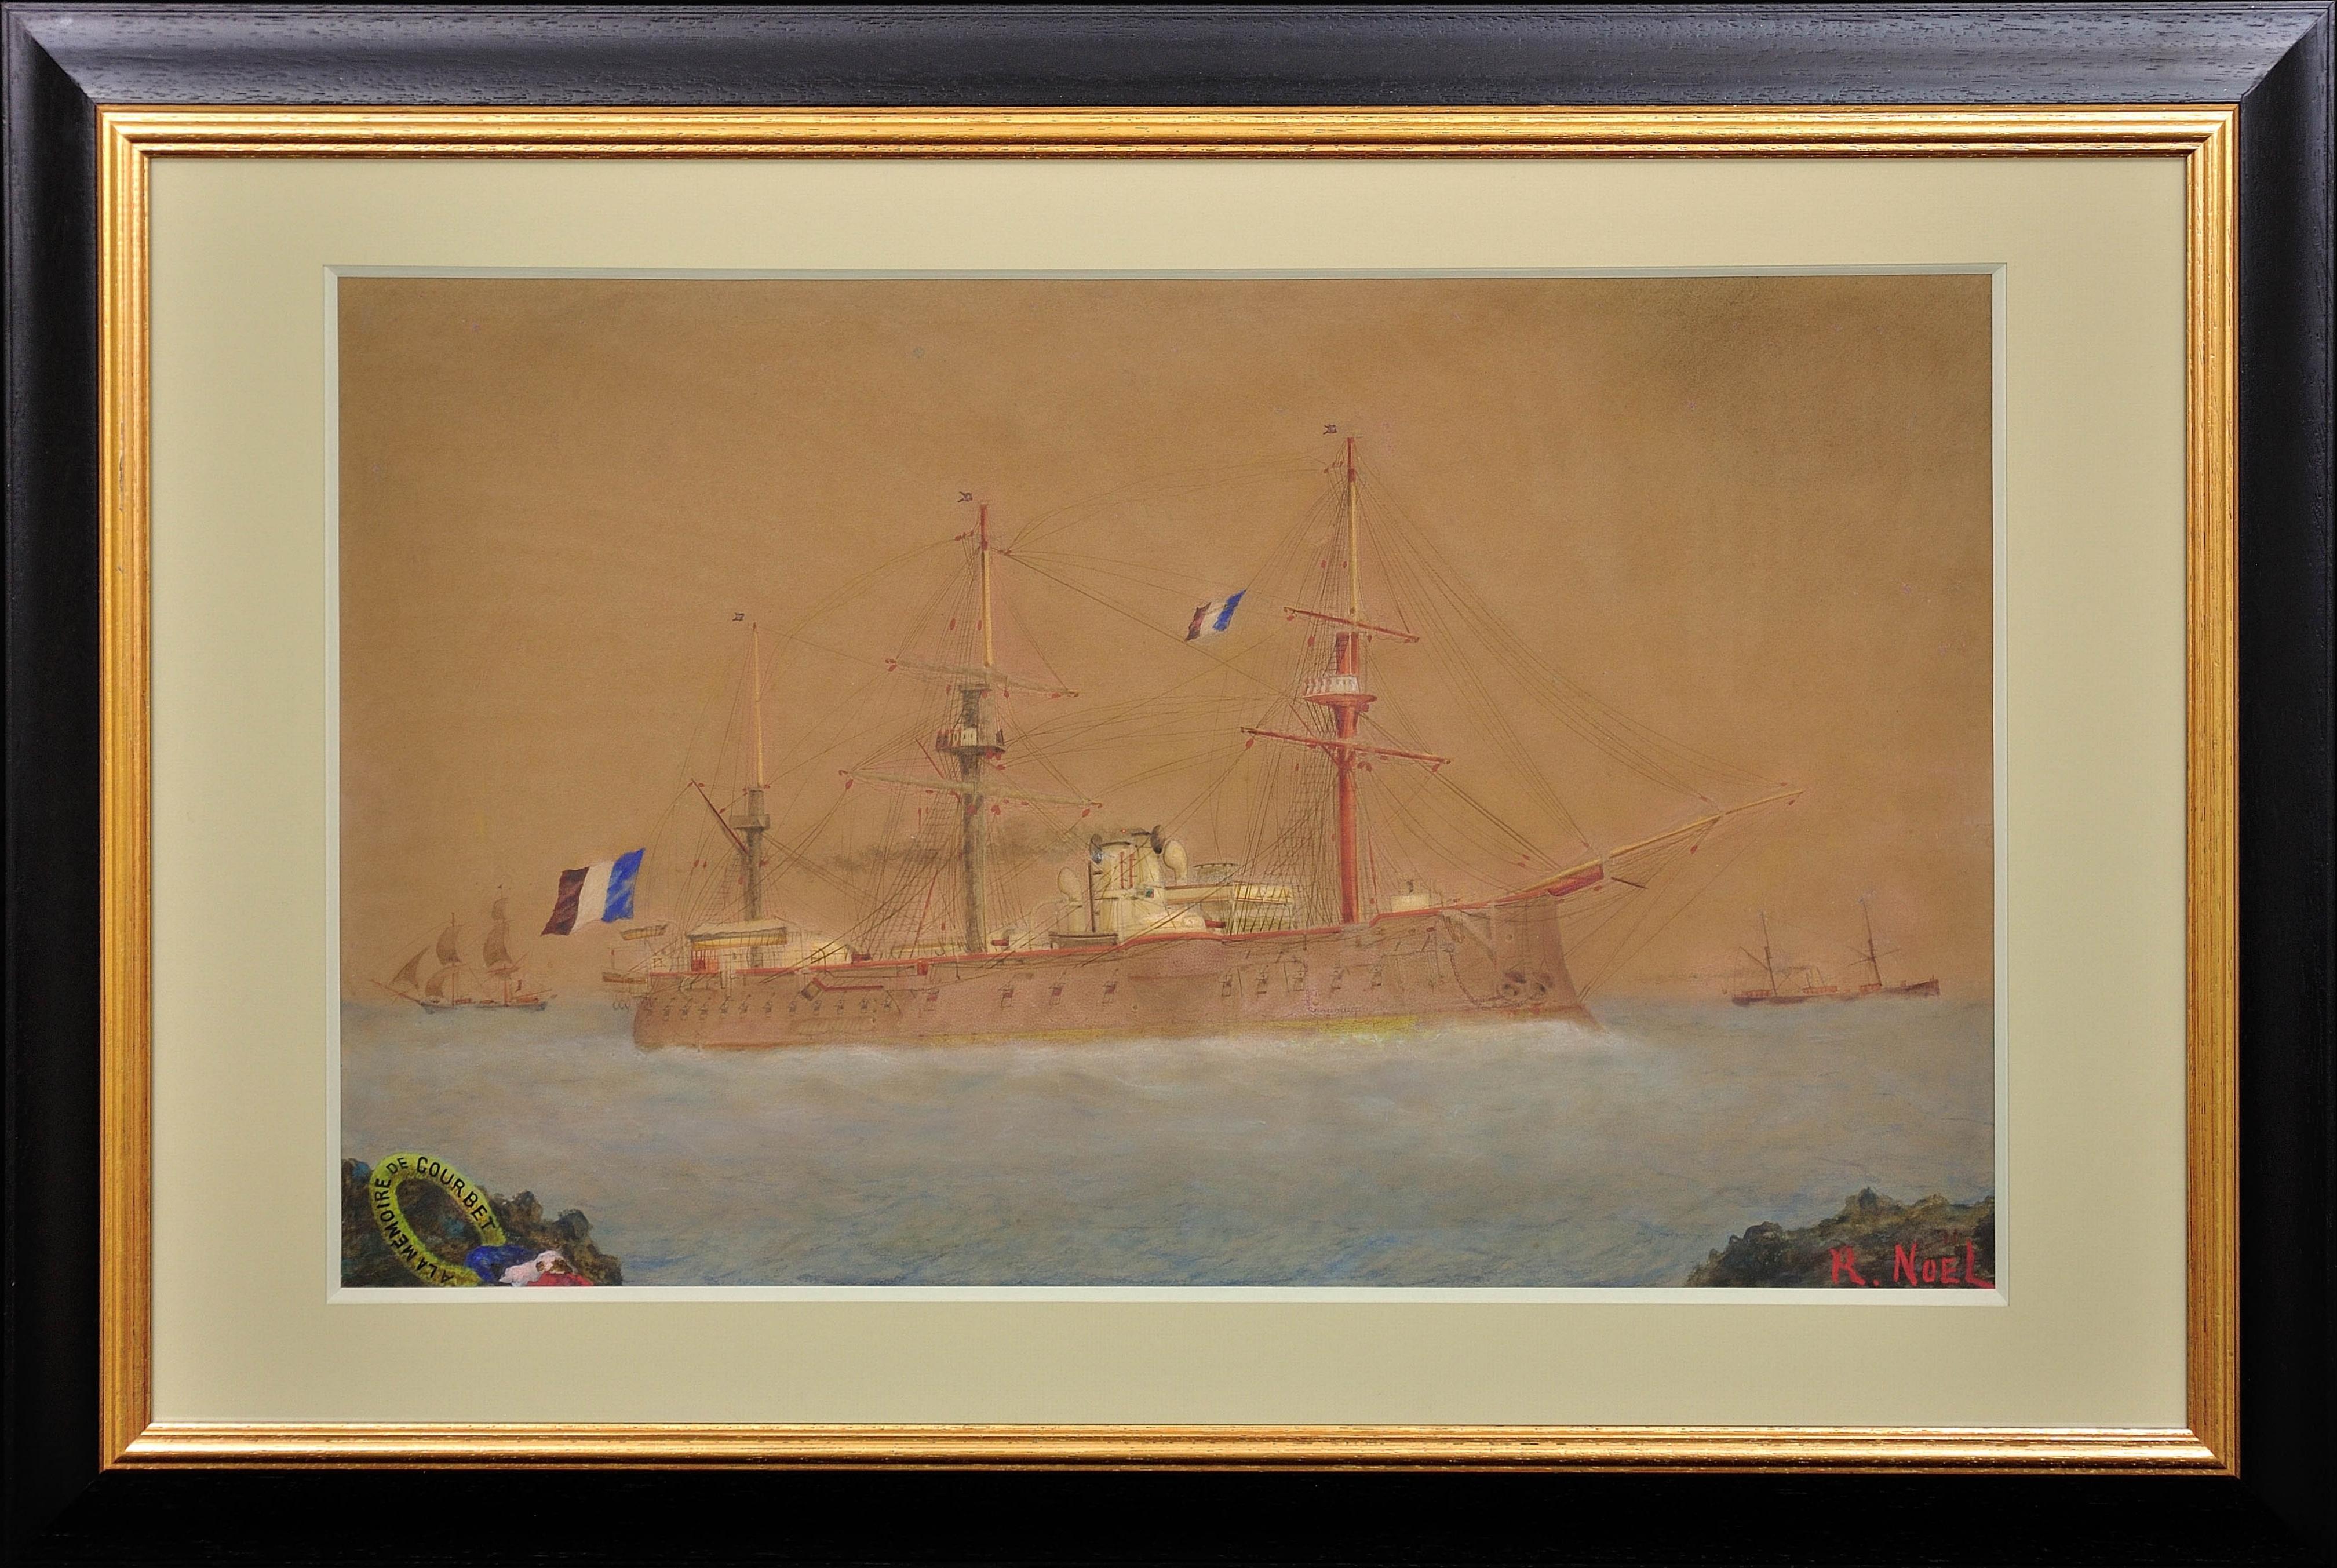 French Navy Ironclad Warship Battleship Courbet. A Sailor’s Sentimental Tribute.